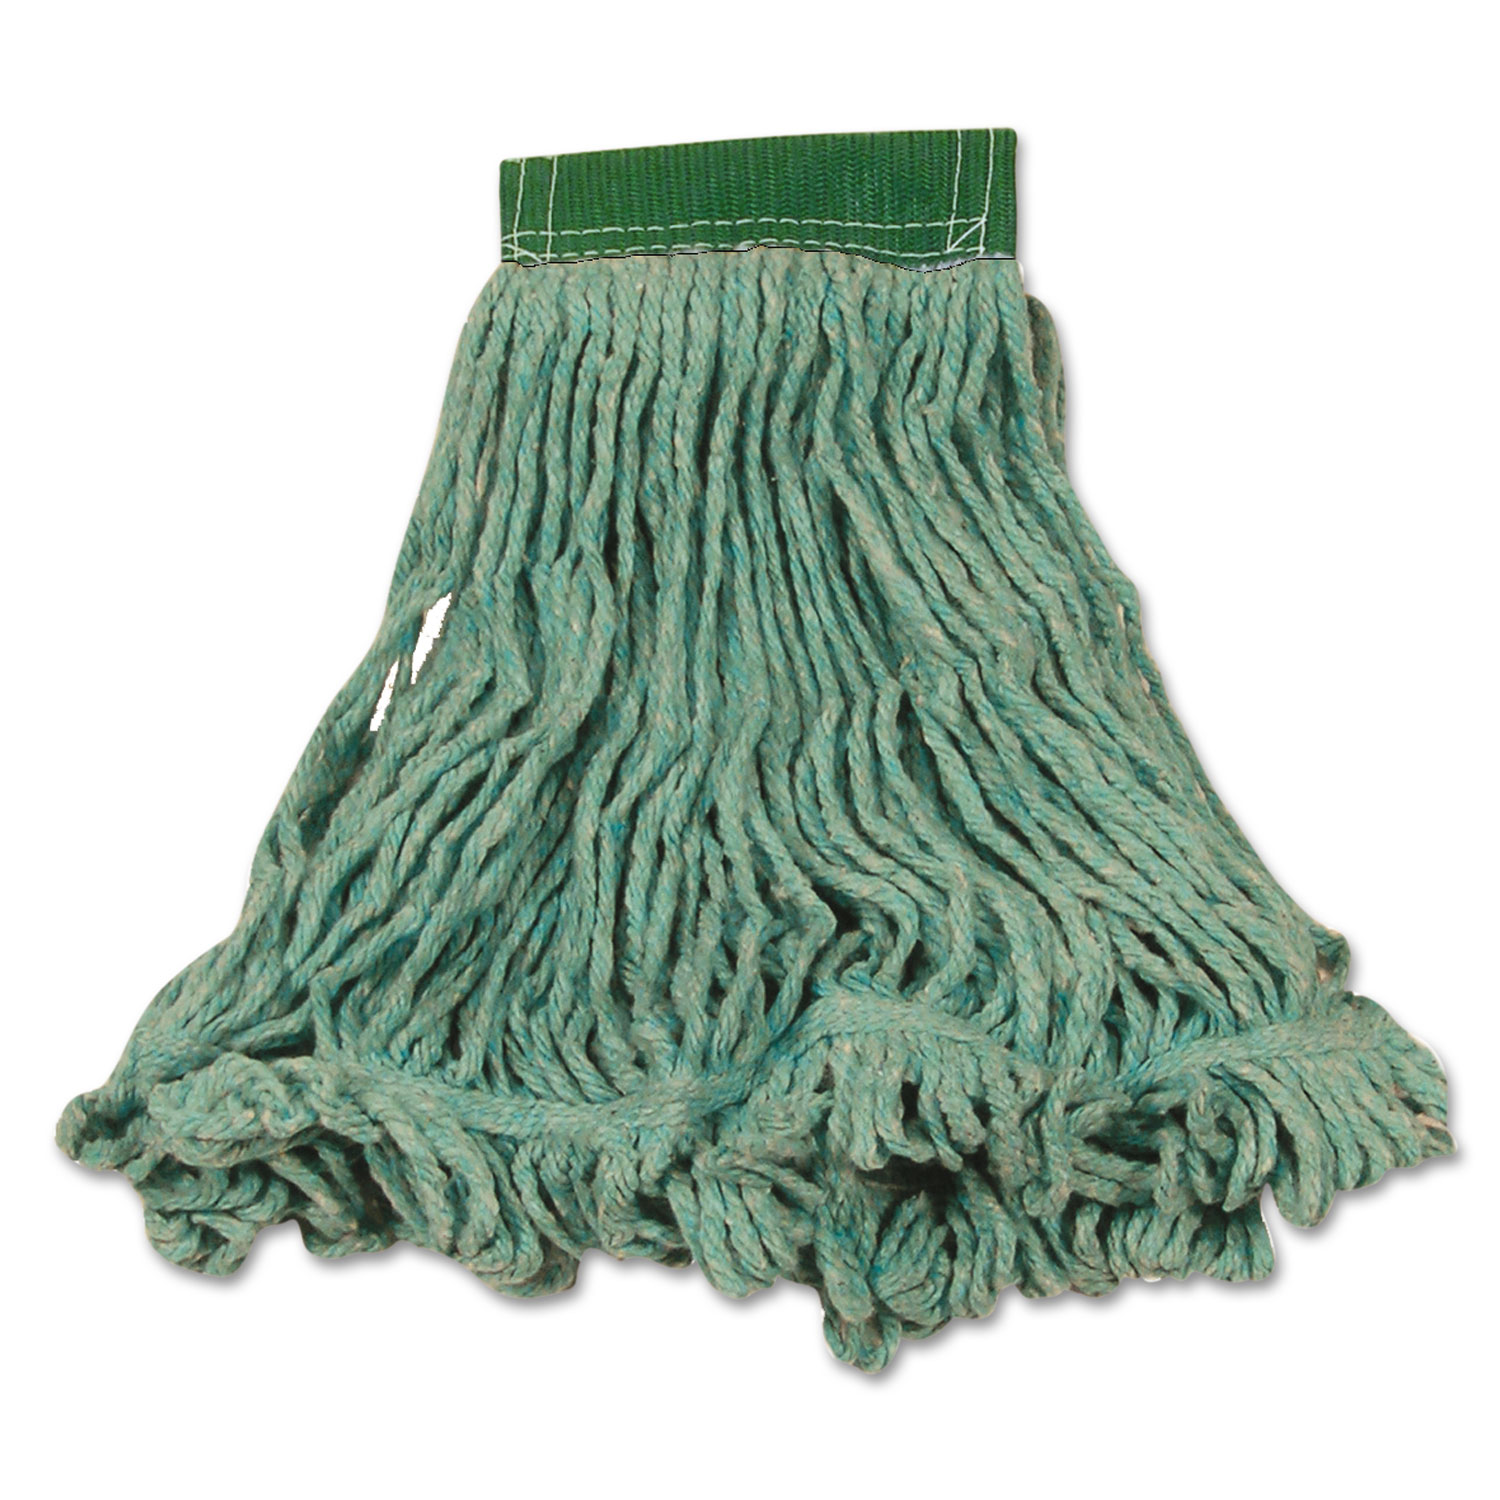 Rubbermaid® Commercial Super Stitch Blend Mop Heads, Cotton/Synthetic, Green, Medium, 6/Carton